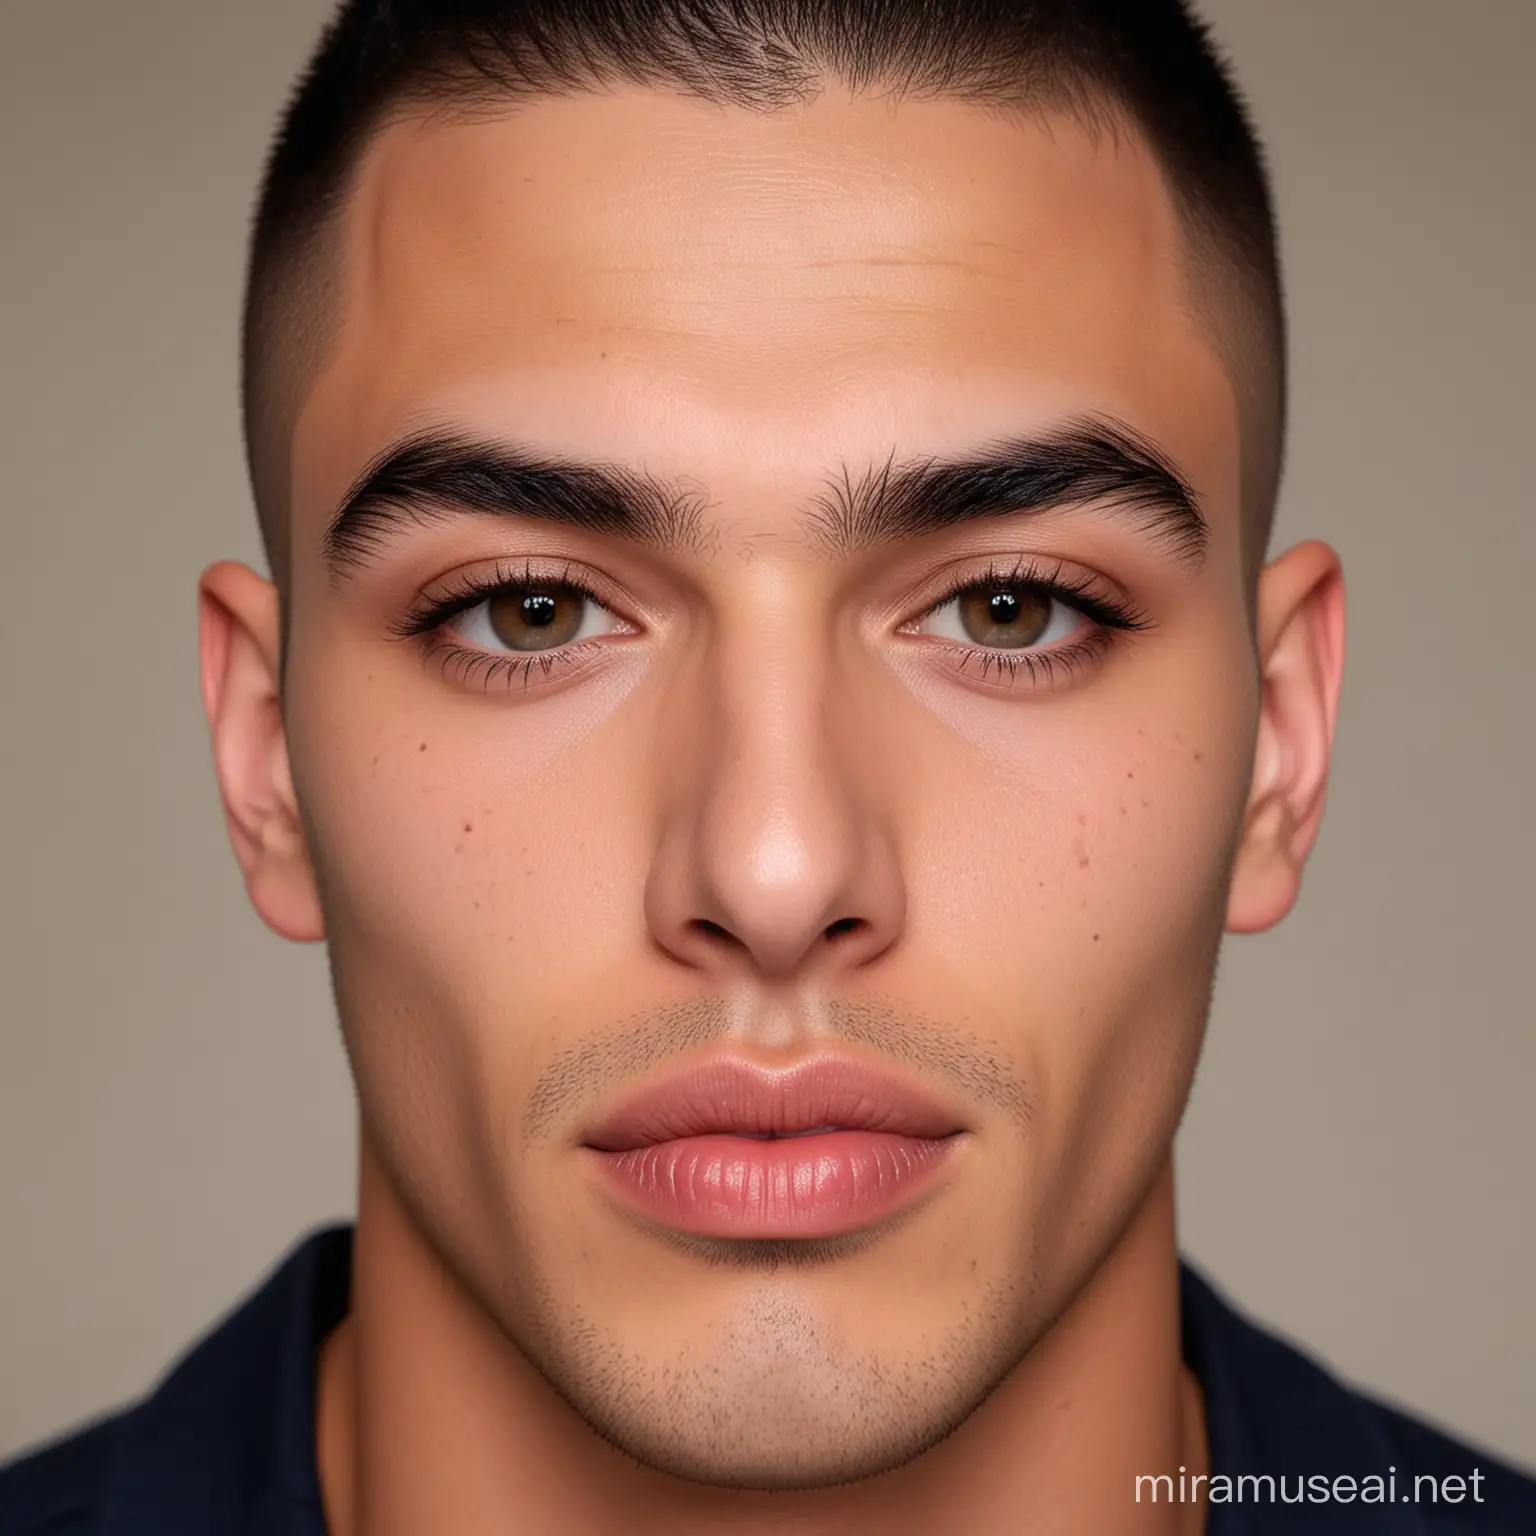 22 yo handsome Chilean man face, shaved, symmetric face, handsome, huge lips, thick brows, perfect, HD, 8K, skin texture, square jaw, front view, bald,